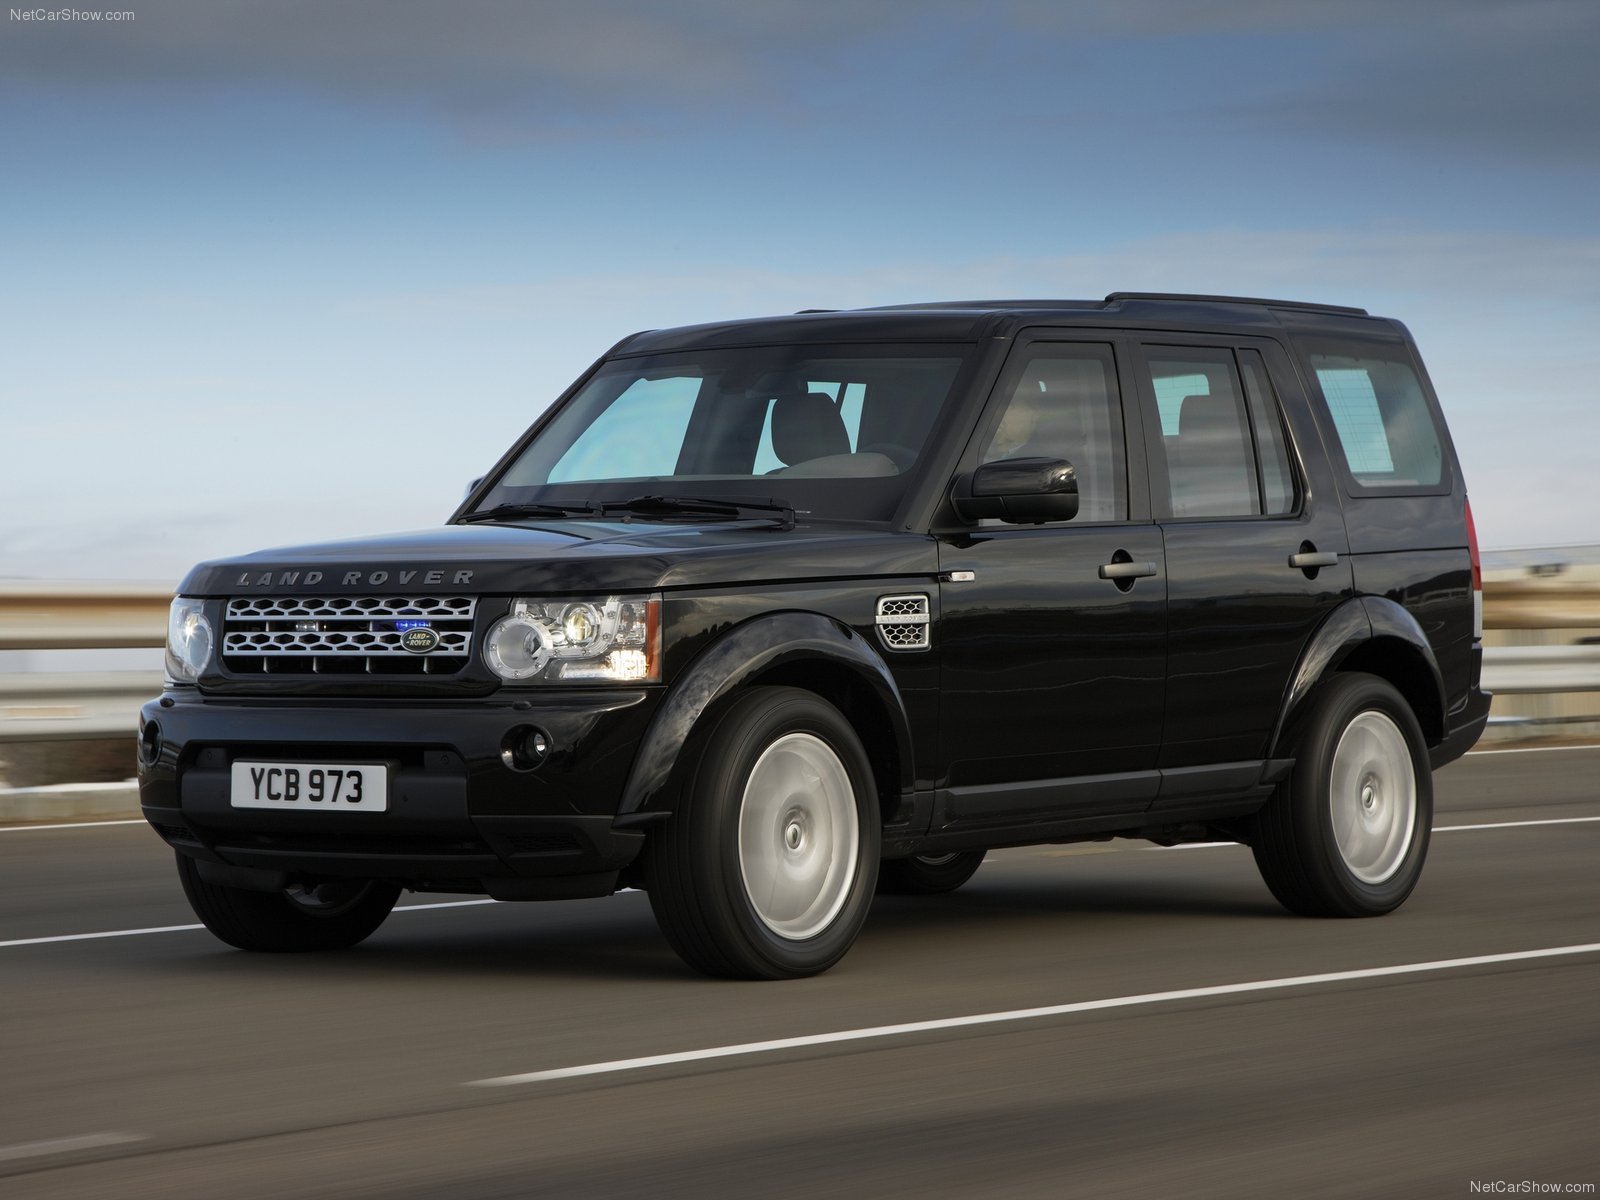 Land Rover Discovery 4 Armoured photos - PhotoGallery with 5 pics ...